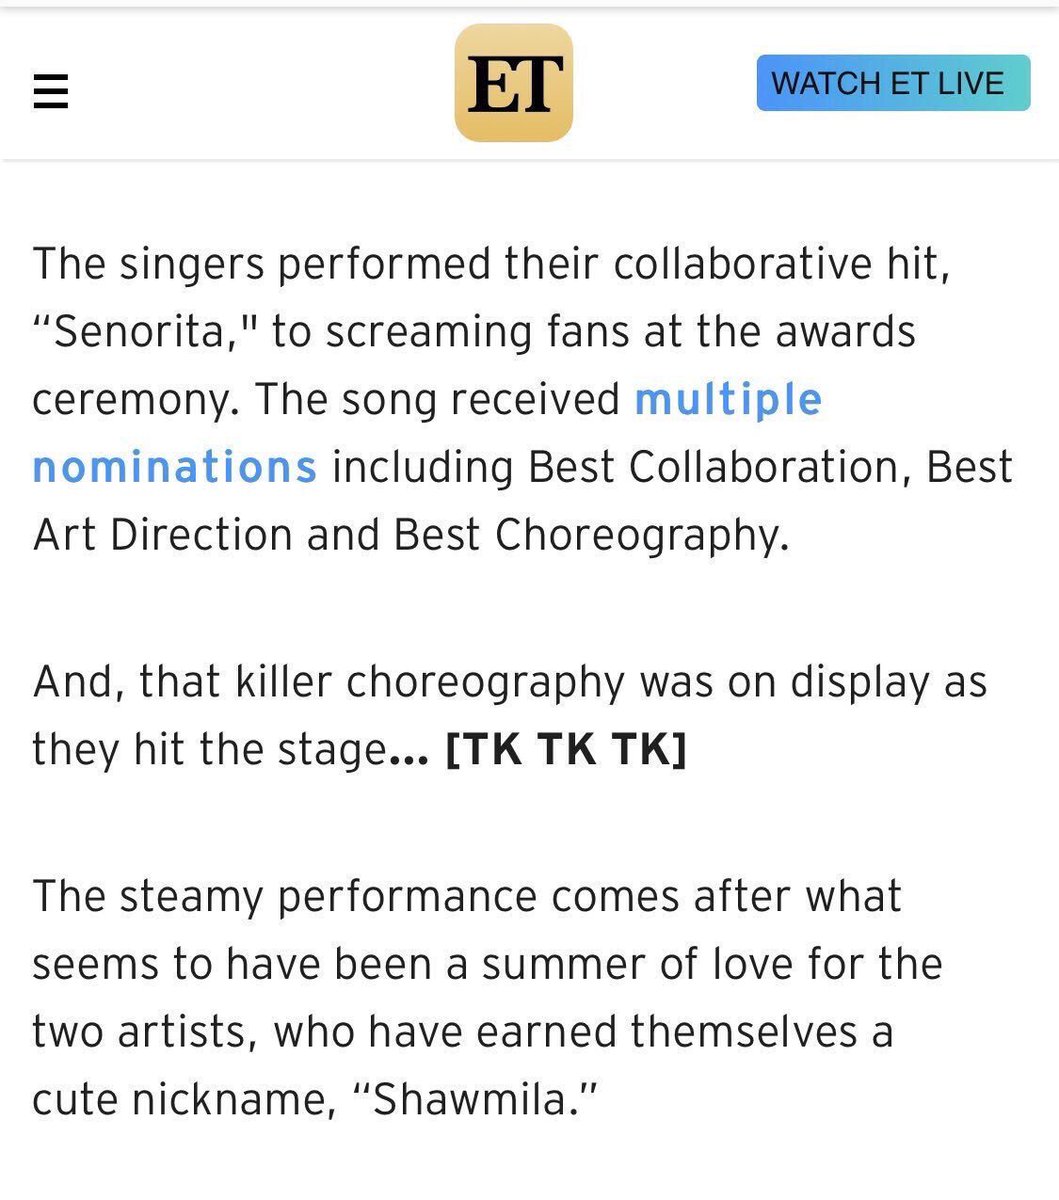 Entertainment Weekly accidentally release article before scheduled release. 

The article states that Shawn Mendes & Camila Cabello got flirty at their VMAs performance, despite the award show not even happening yet.